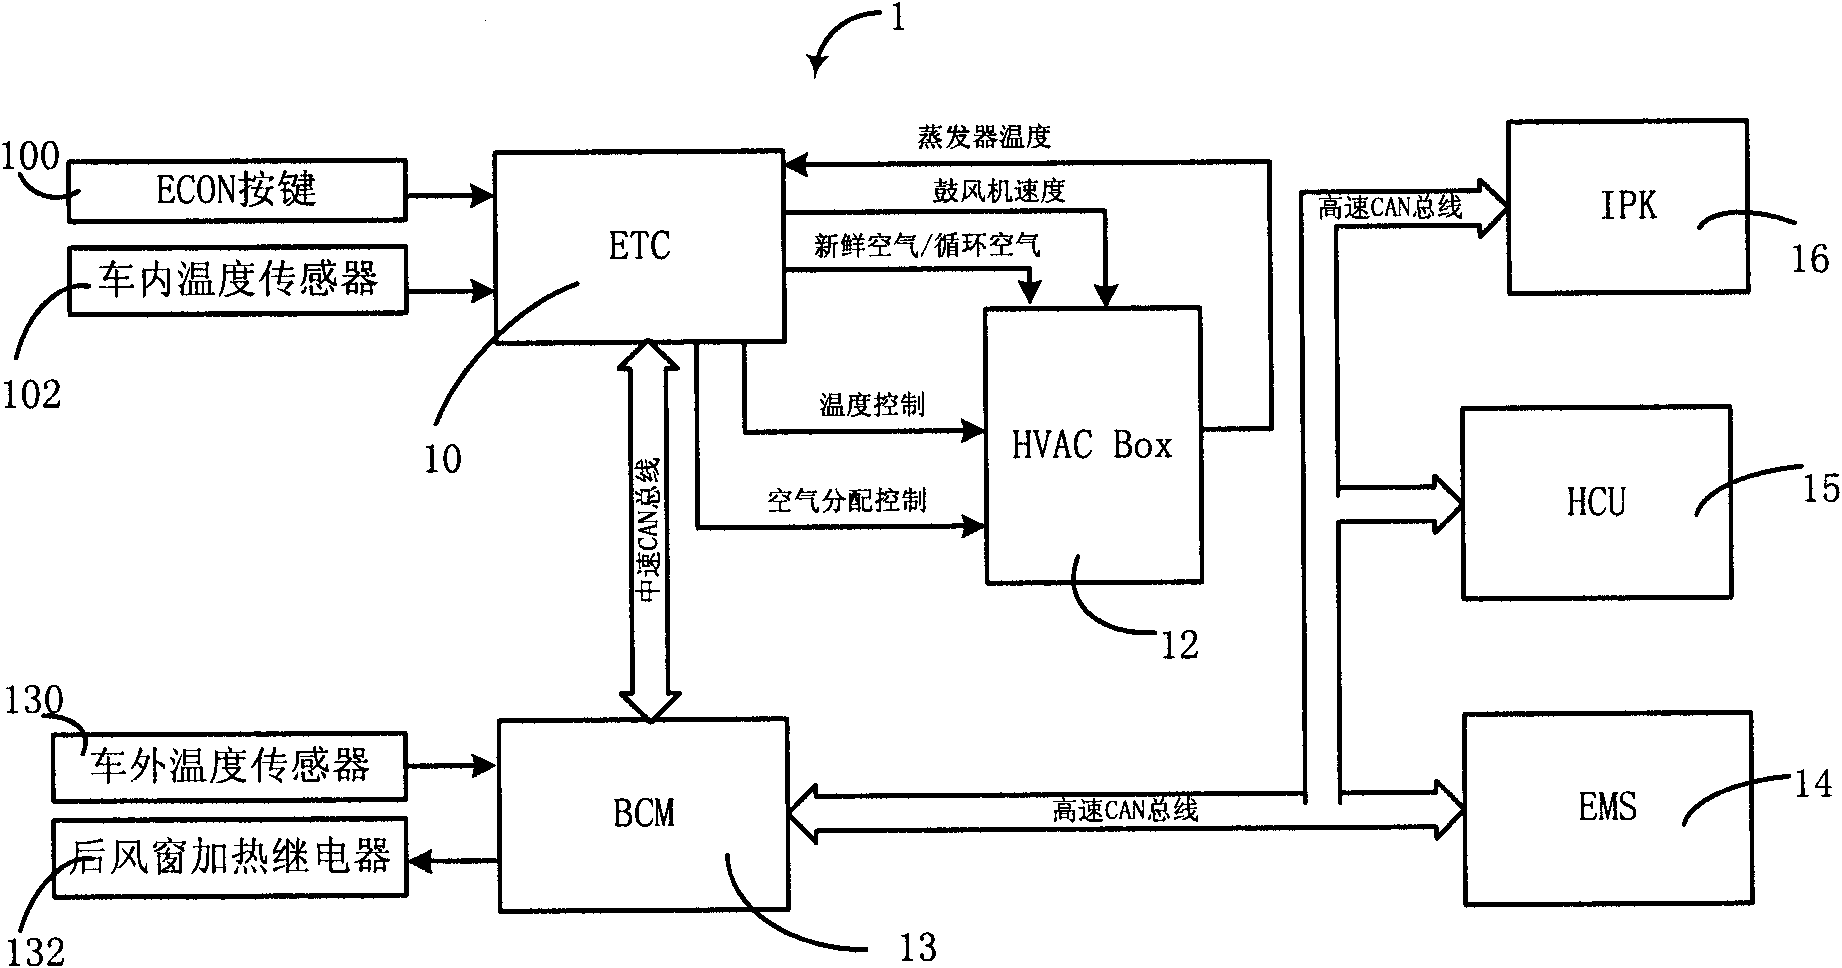 Heating ventilation and air conditioning electric control system and hybrid power automobile